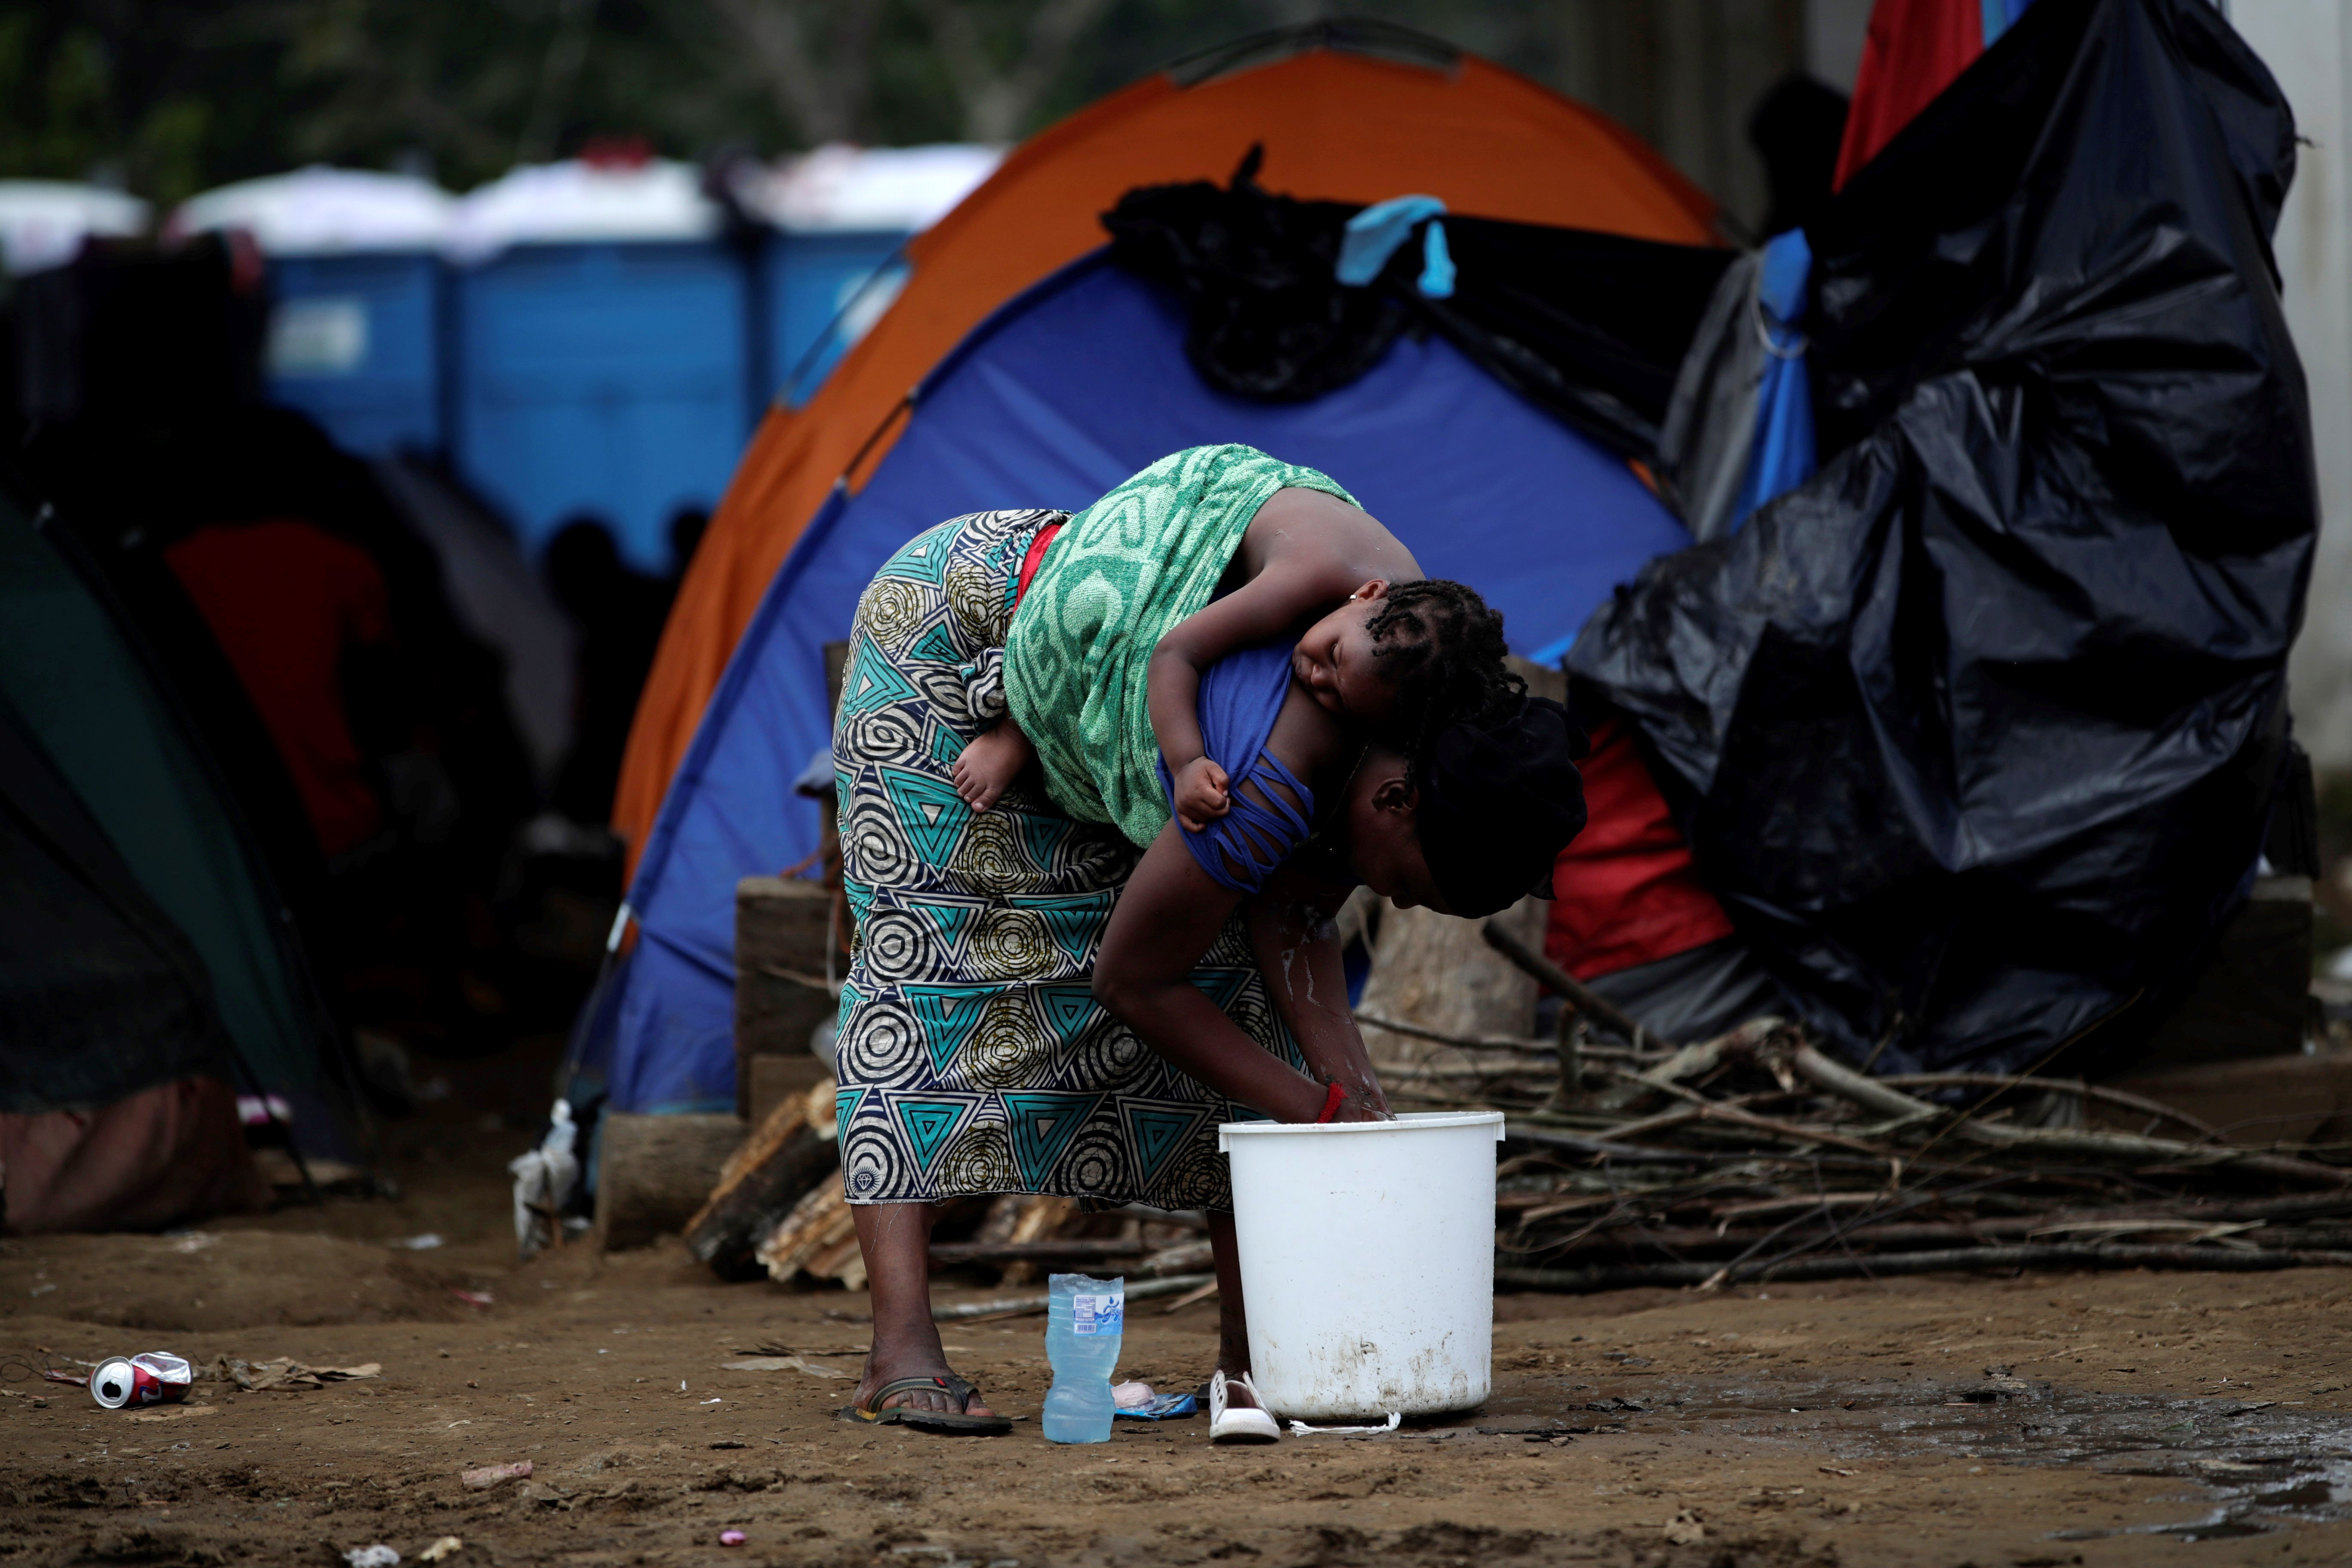 epa07611568 (17/40) A migrant woman carries her child her back while doing the dishes at a temporary humanitarian campsite in the village of Penita, Darien, Panama, 22 May 2019. Every week, hundreds of migrants arrive on small boats to Penita, a small indigenous village in the Darien Gap on the Panamanian side of the border with Colombia, as they make their way along a perilous route towards North America.  EPA/Bienvenido Velasco  ATTENTION: For the full PHOTO ESSAY text please see Advisory Notice epa07611551